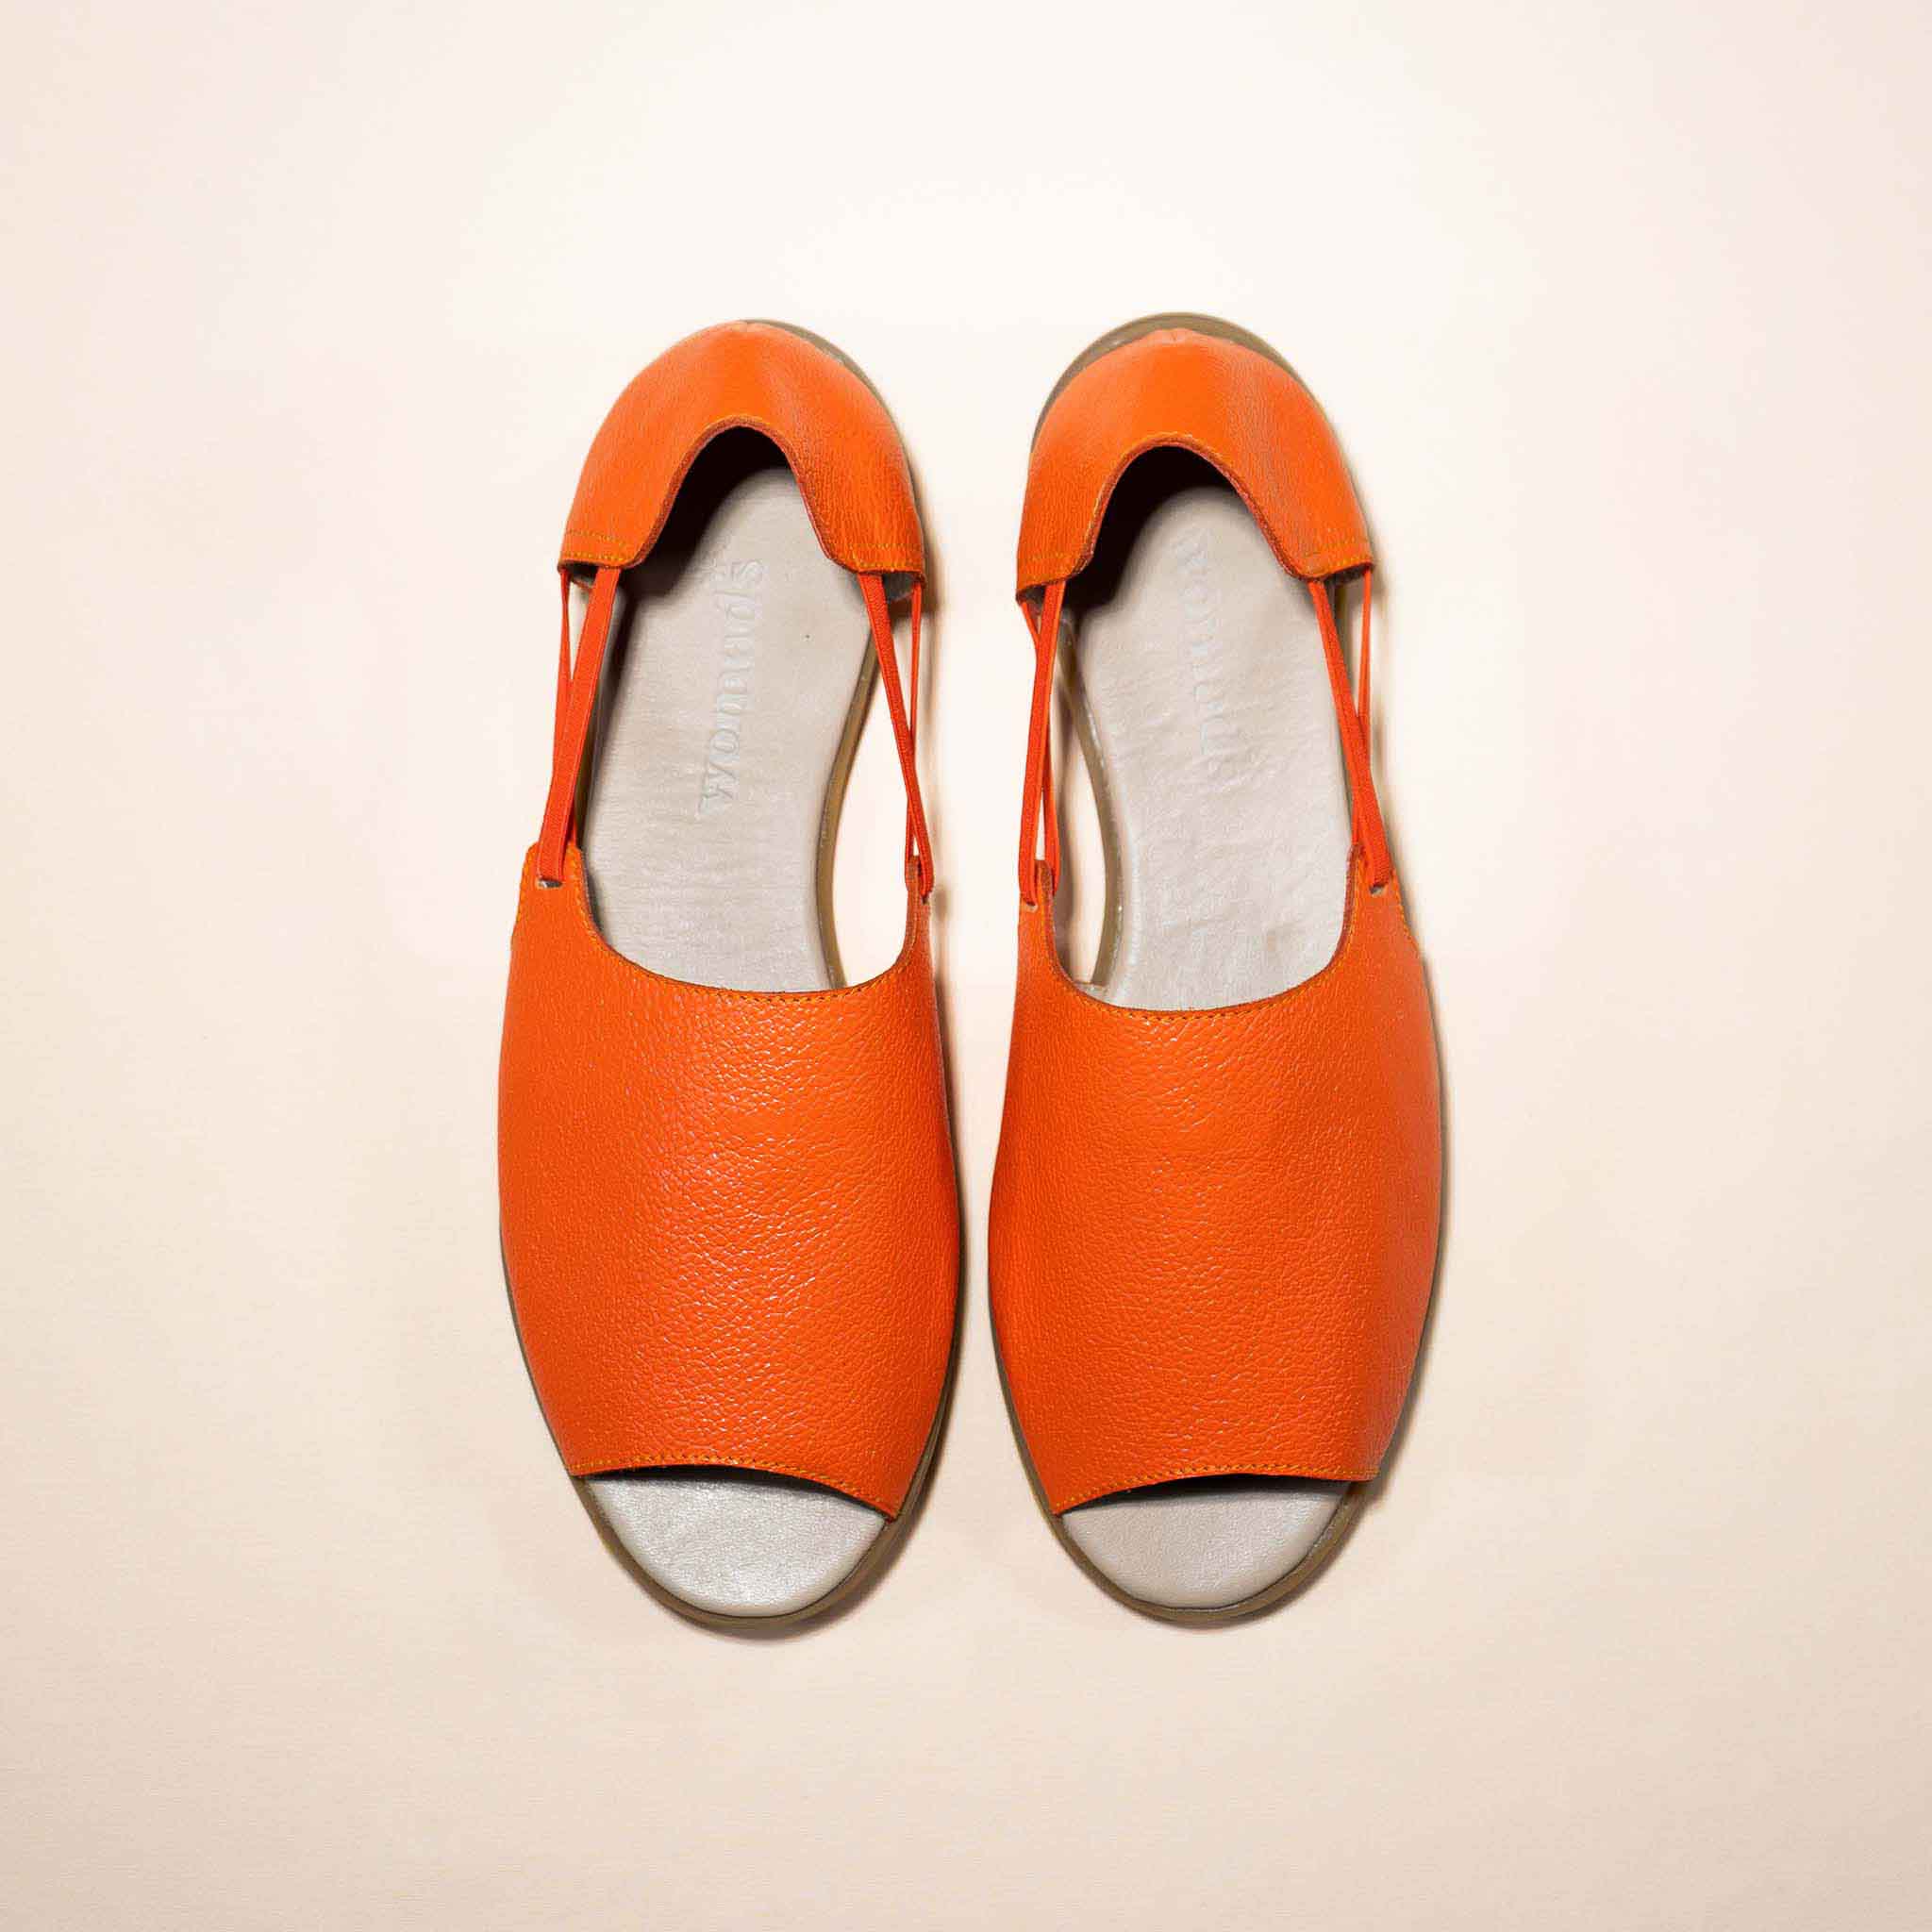 Womads orange sandals top view